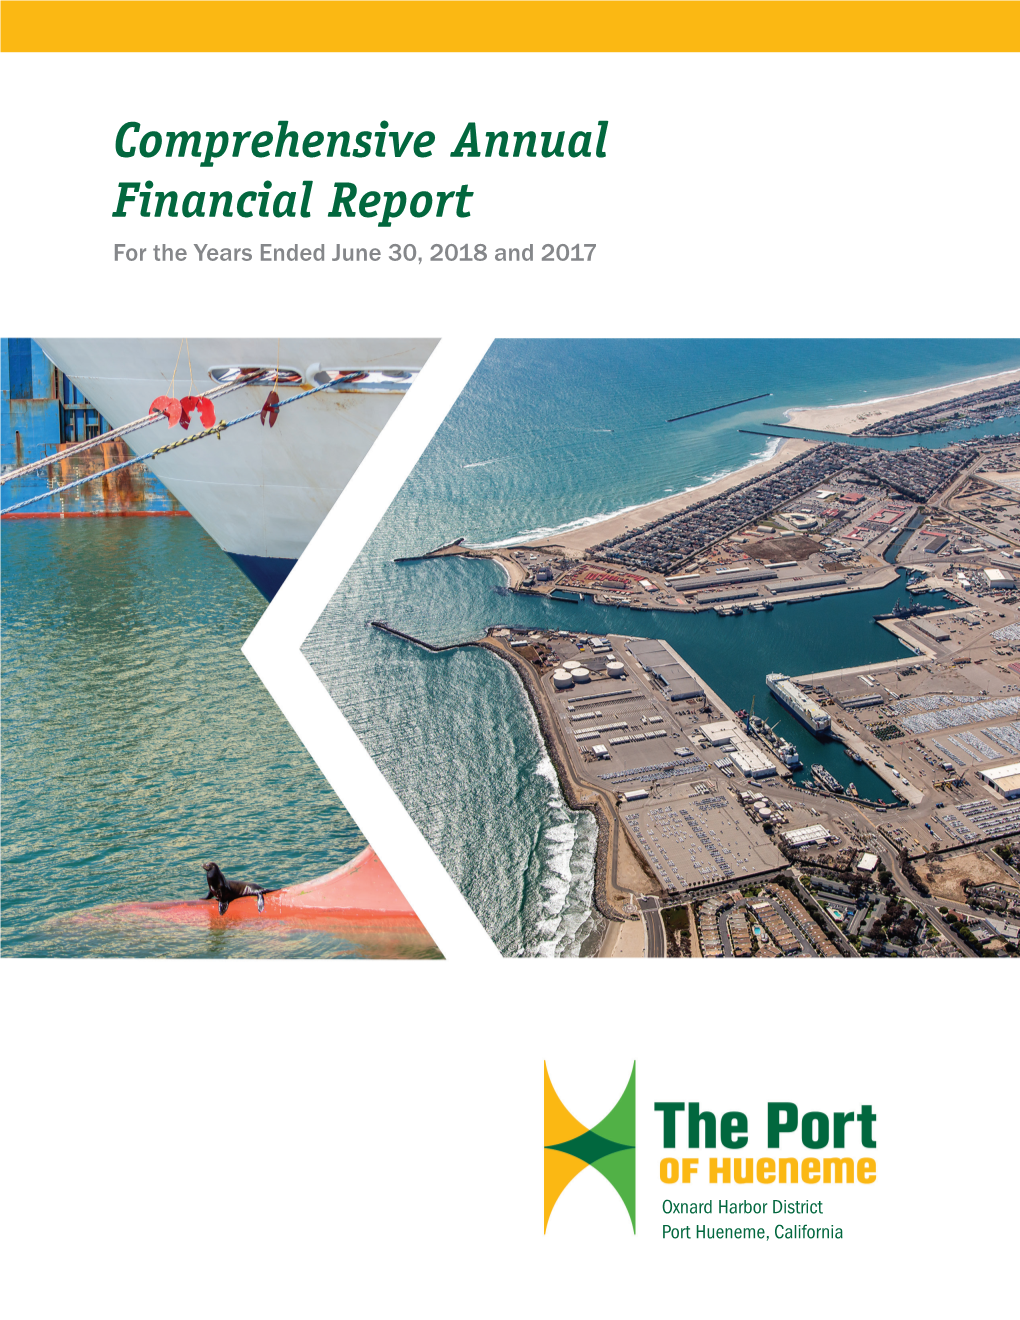 Comprehensive Annual Financial Report for the Years Ended June 30, 2018 and 2017